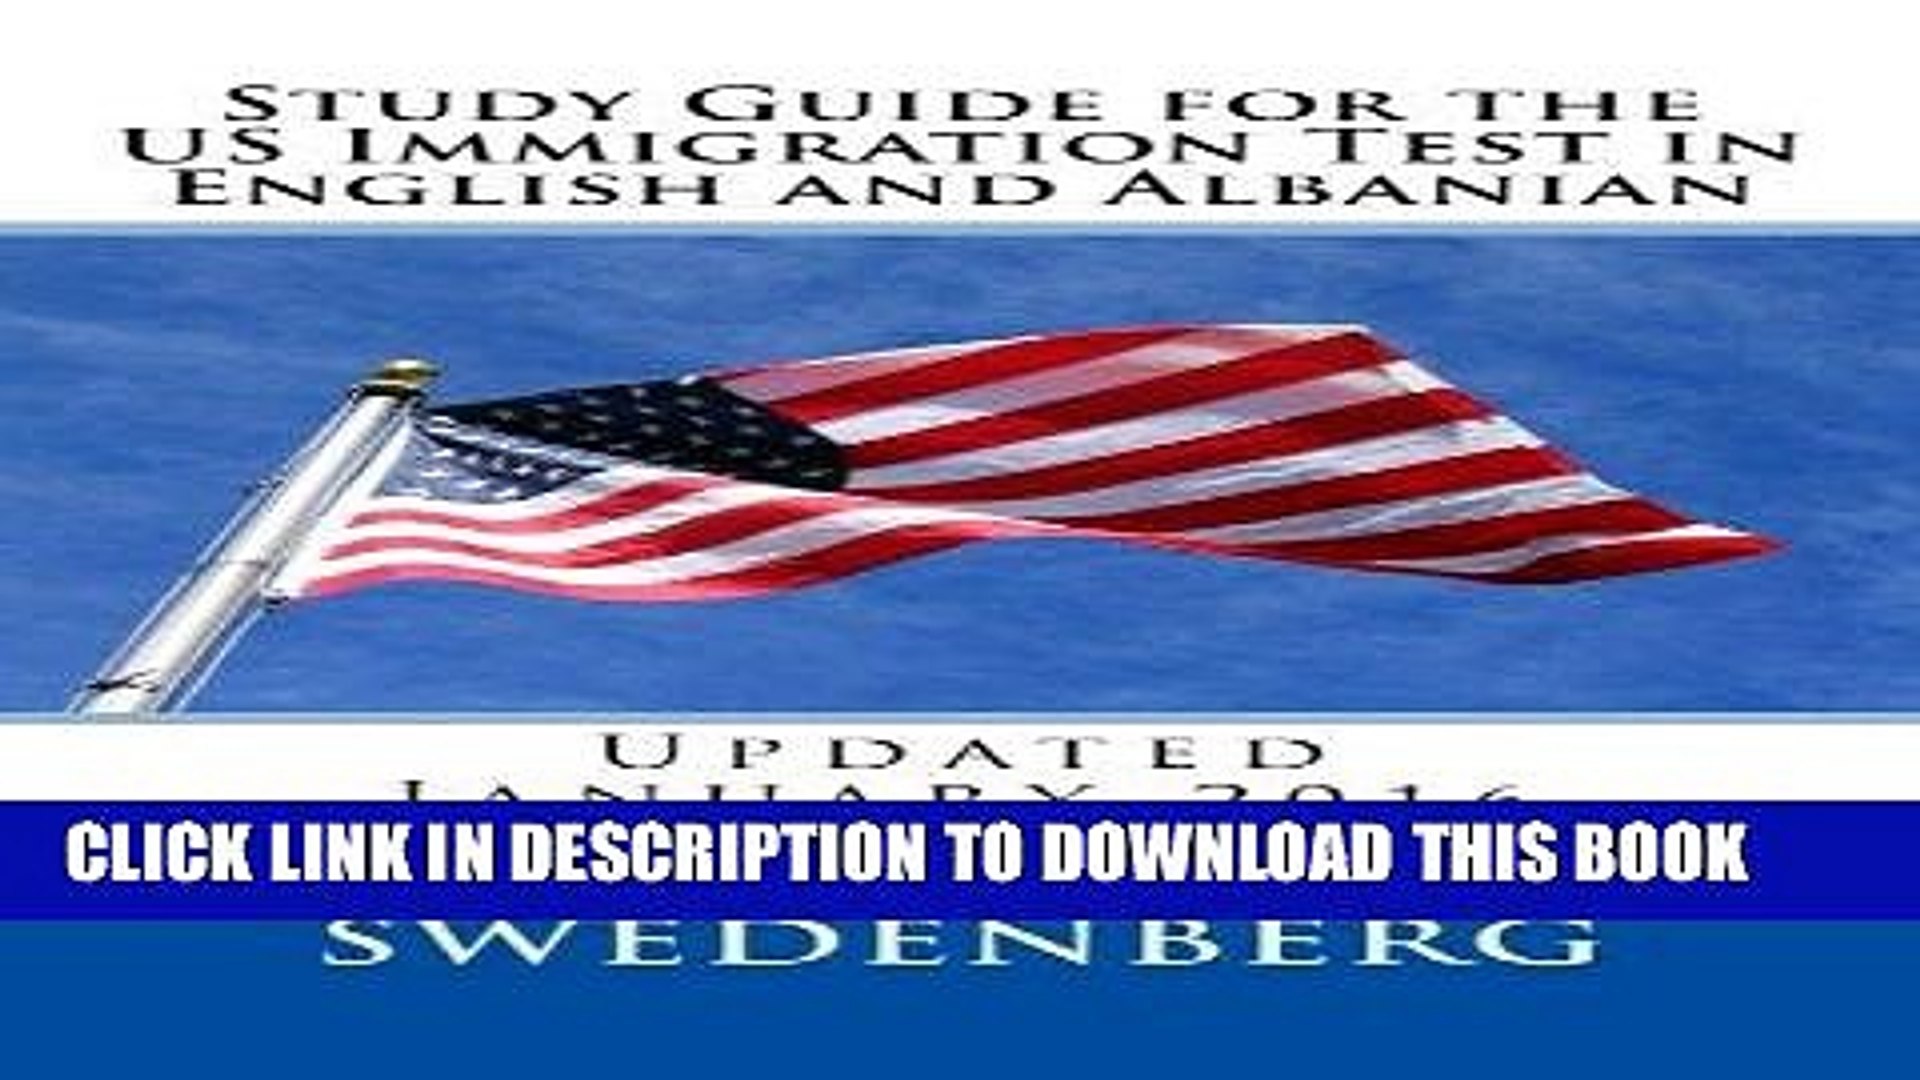 Read Now Study Guide for the US Immigration Test in English and Albanian: Updated March 2016